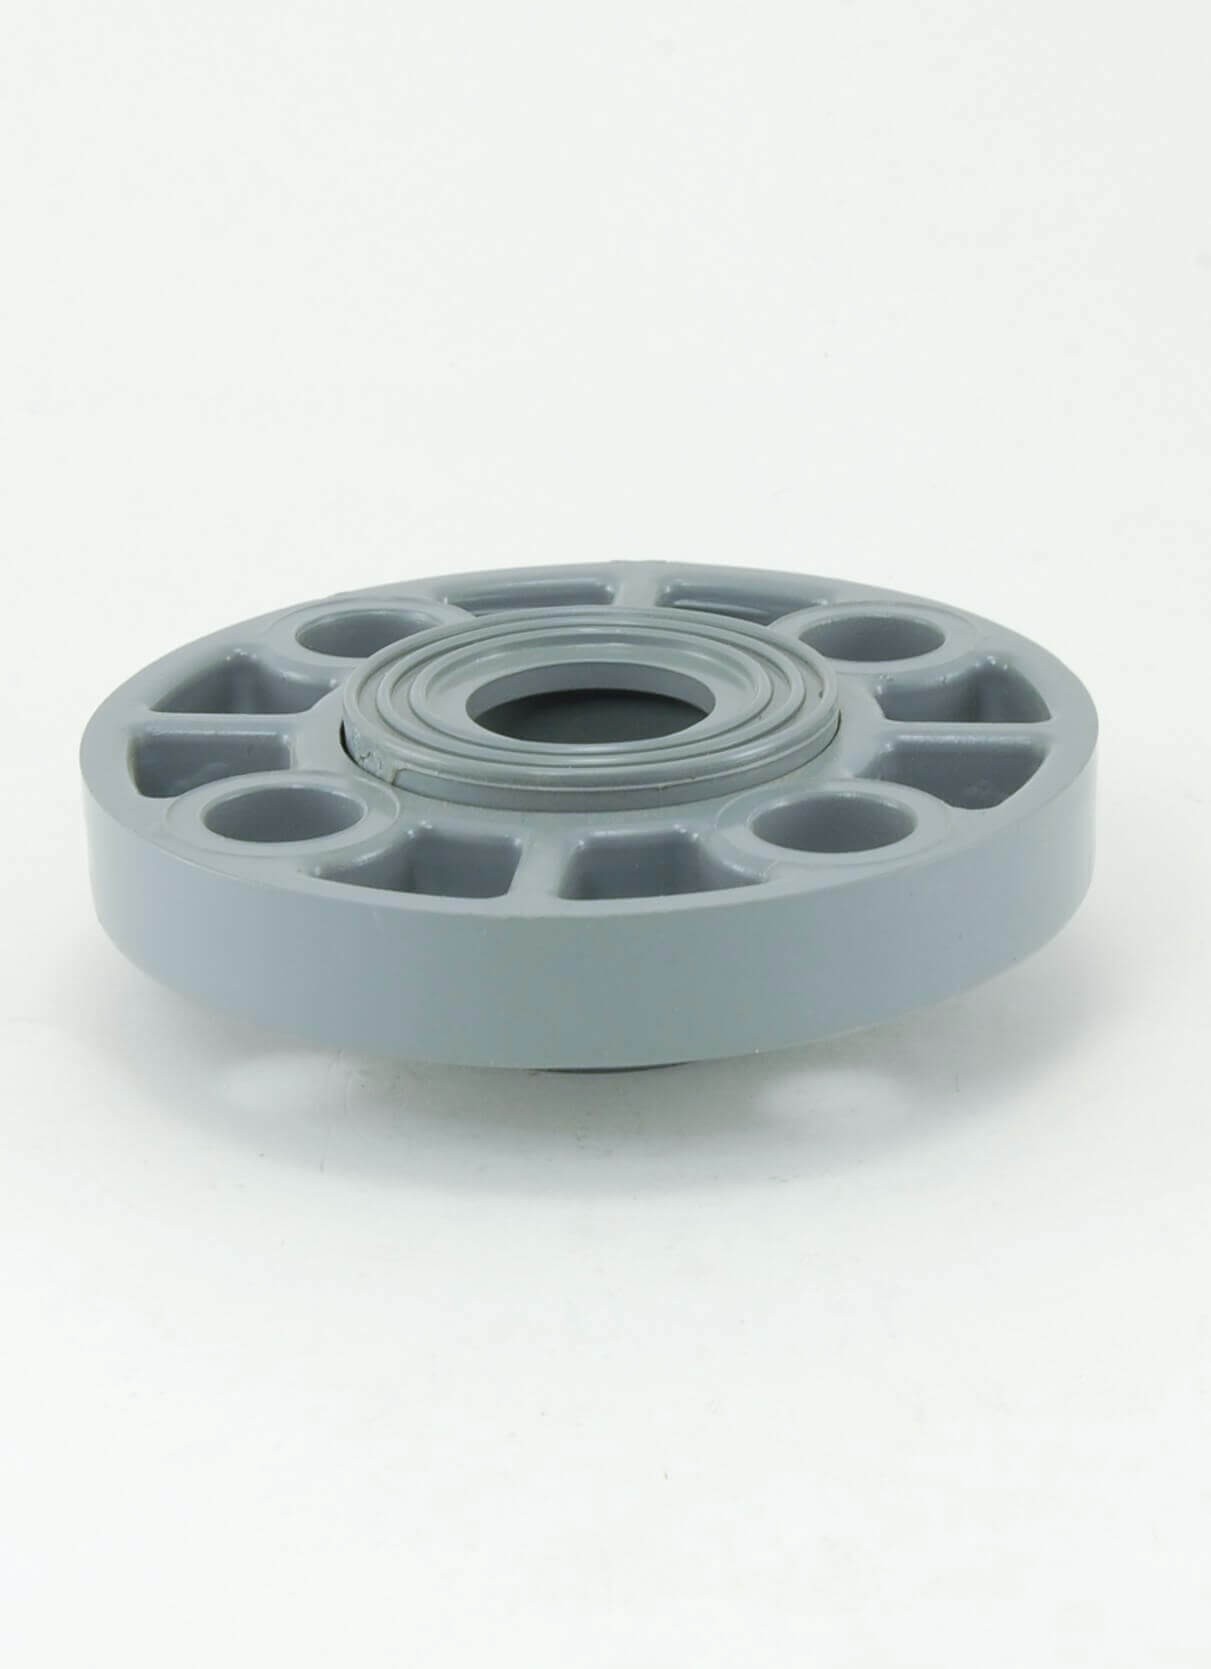 Sch 80 Grey CPVC Flange s - Schedule 80 Fittings CPVC - Schedule 40 & 80 PVC Pipe & Fittings